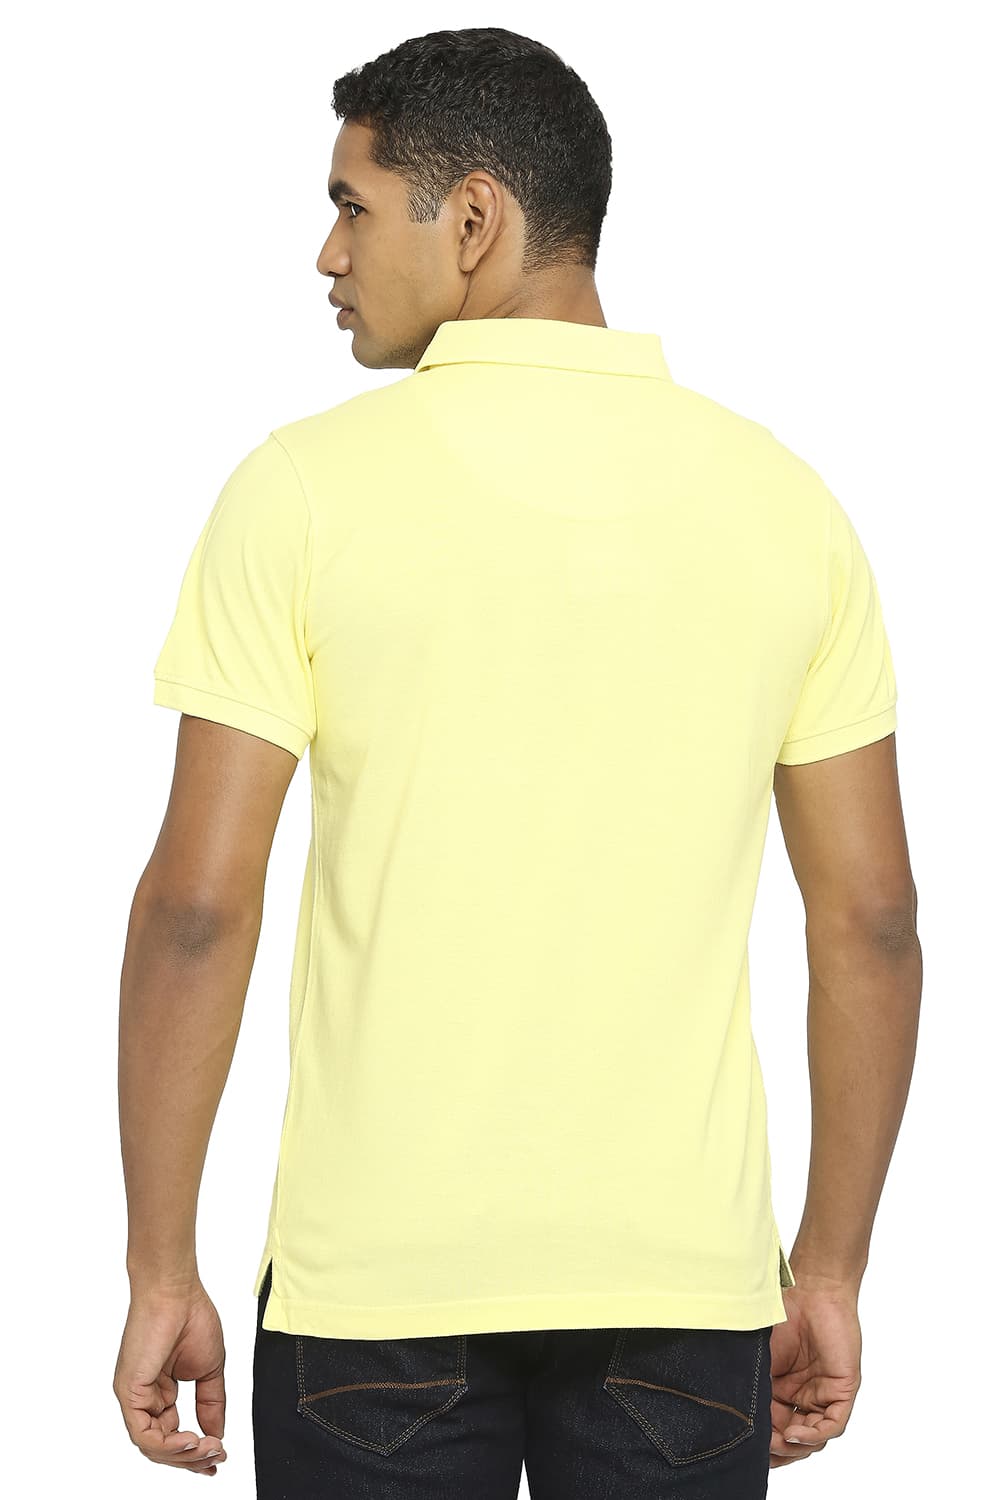 BASICS MUSCLE FIT POLO T-SHIRT